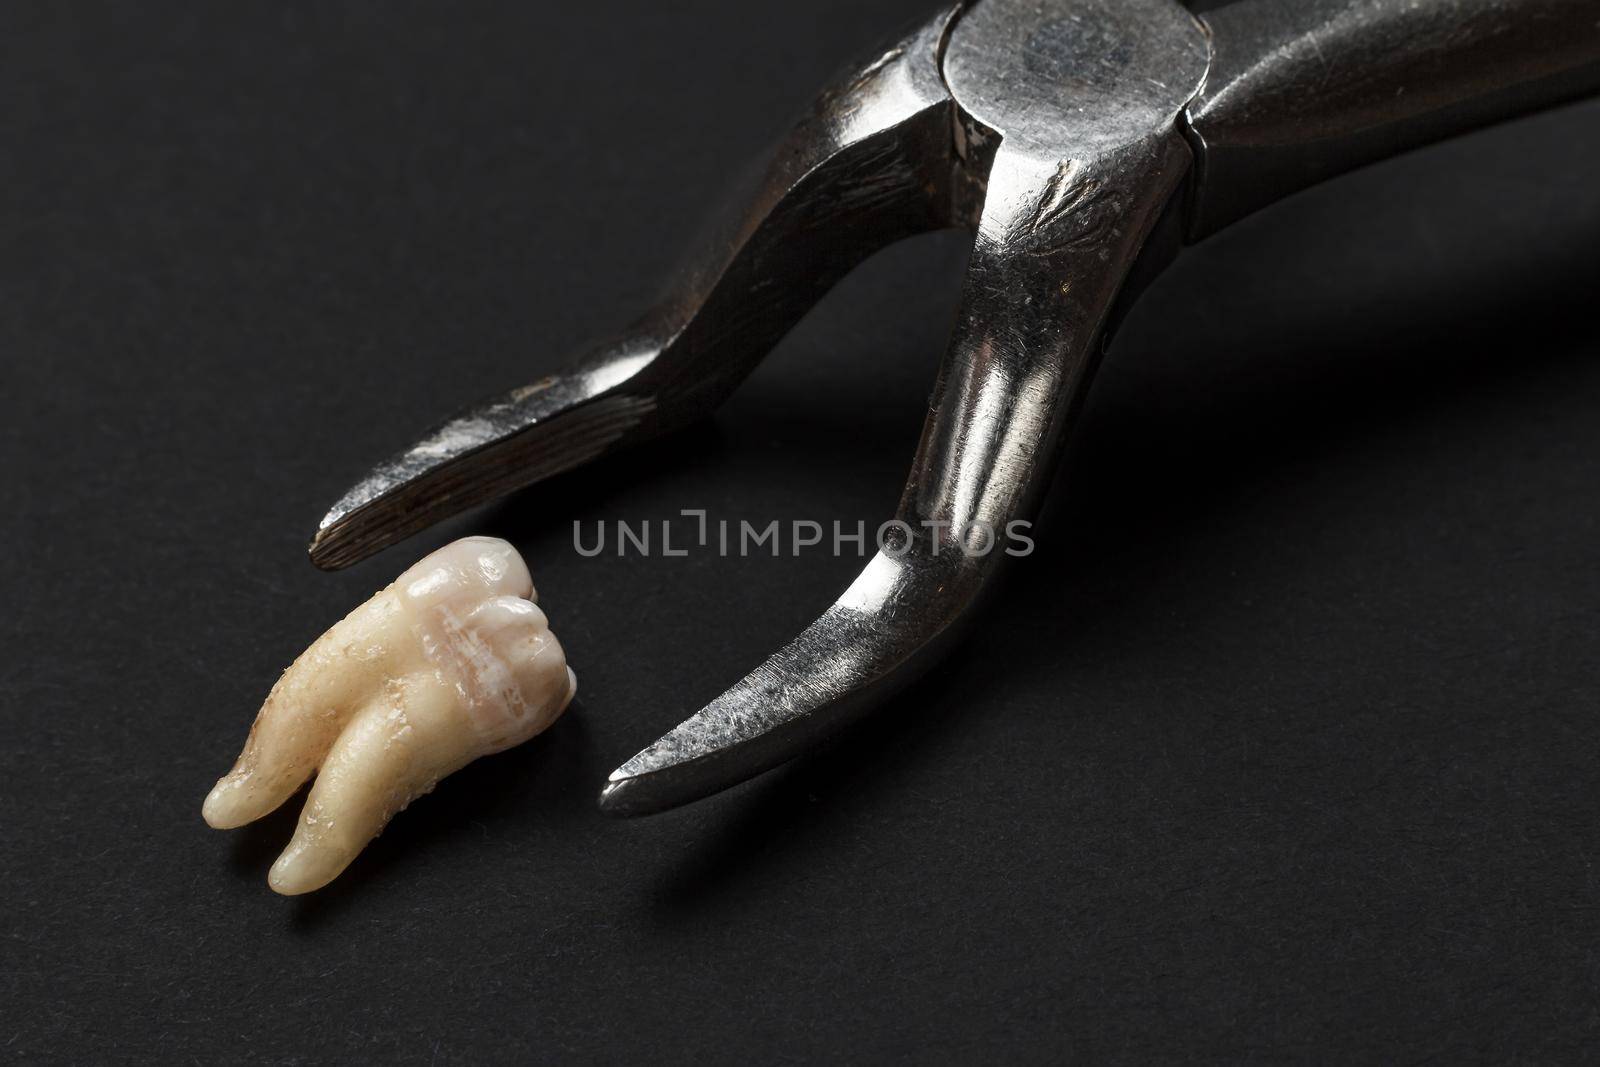 Stainless steel dental pliers and an extracted sick tooth on the black background. Medical tools.